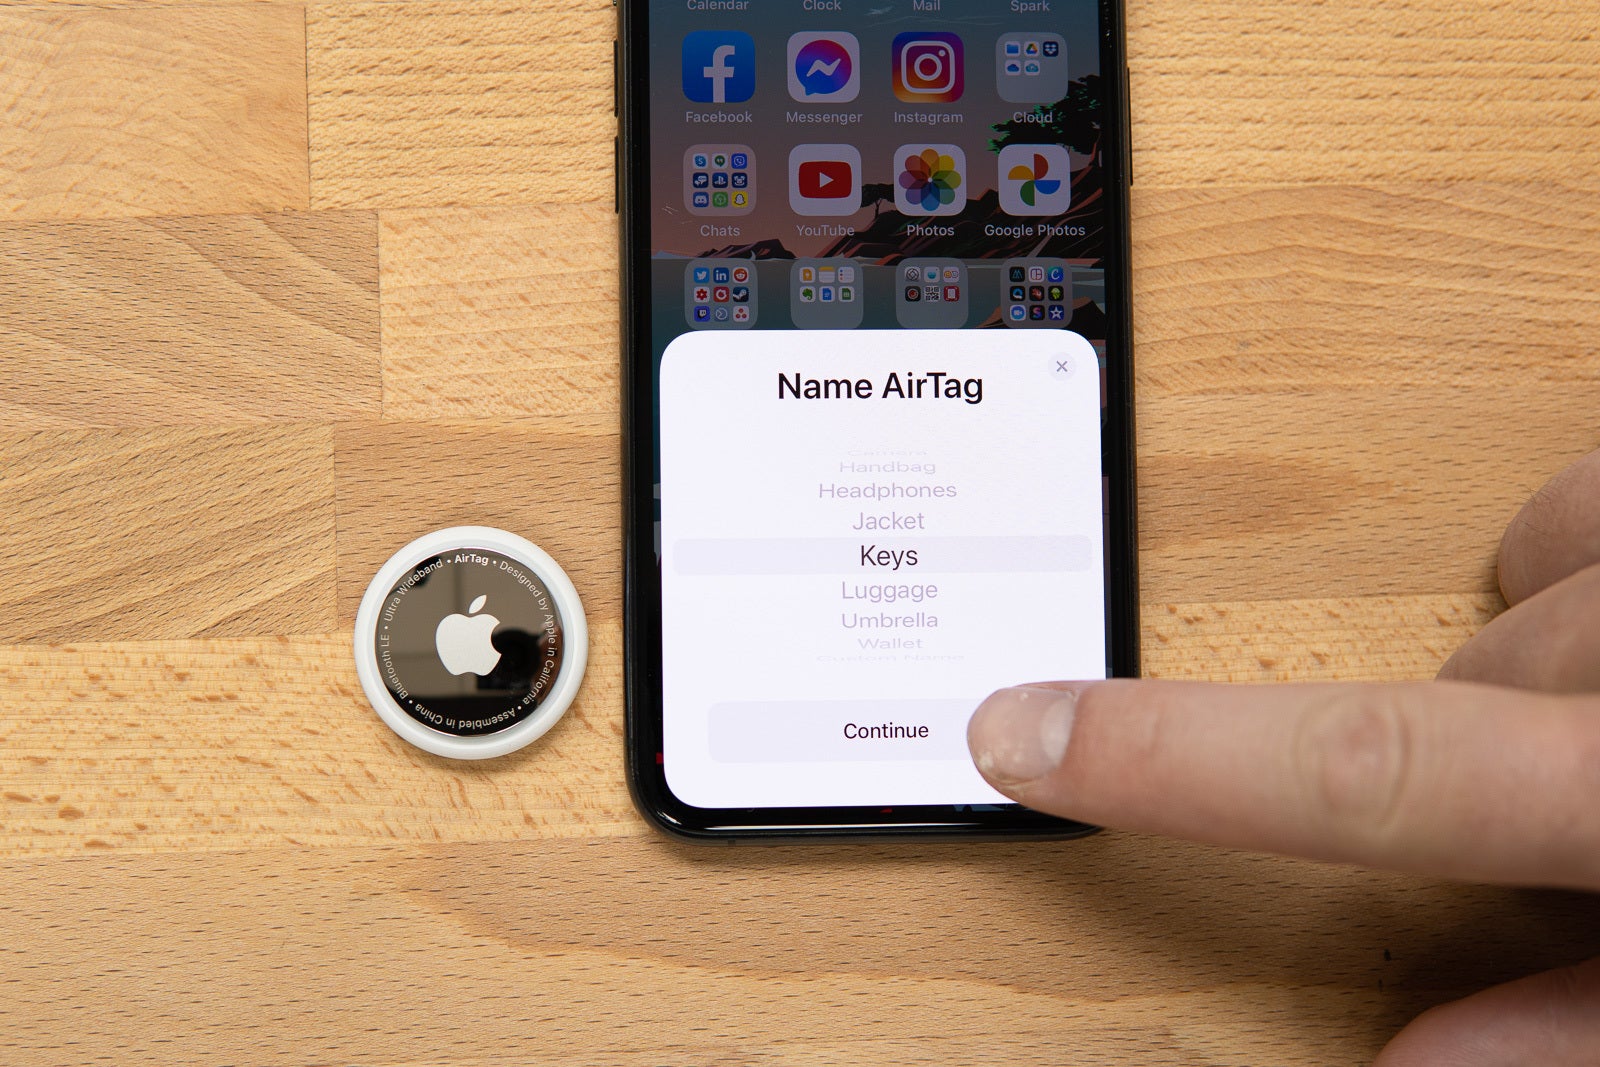 Apple AirTag is easier to get with no shipping delay - Shortages may disrupt the expected record-breaking iPhone 13 and Apple devices sales